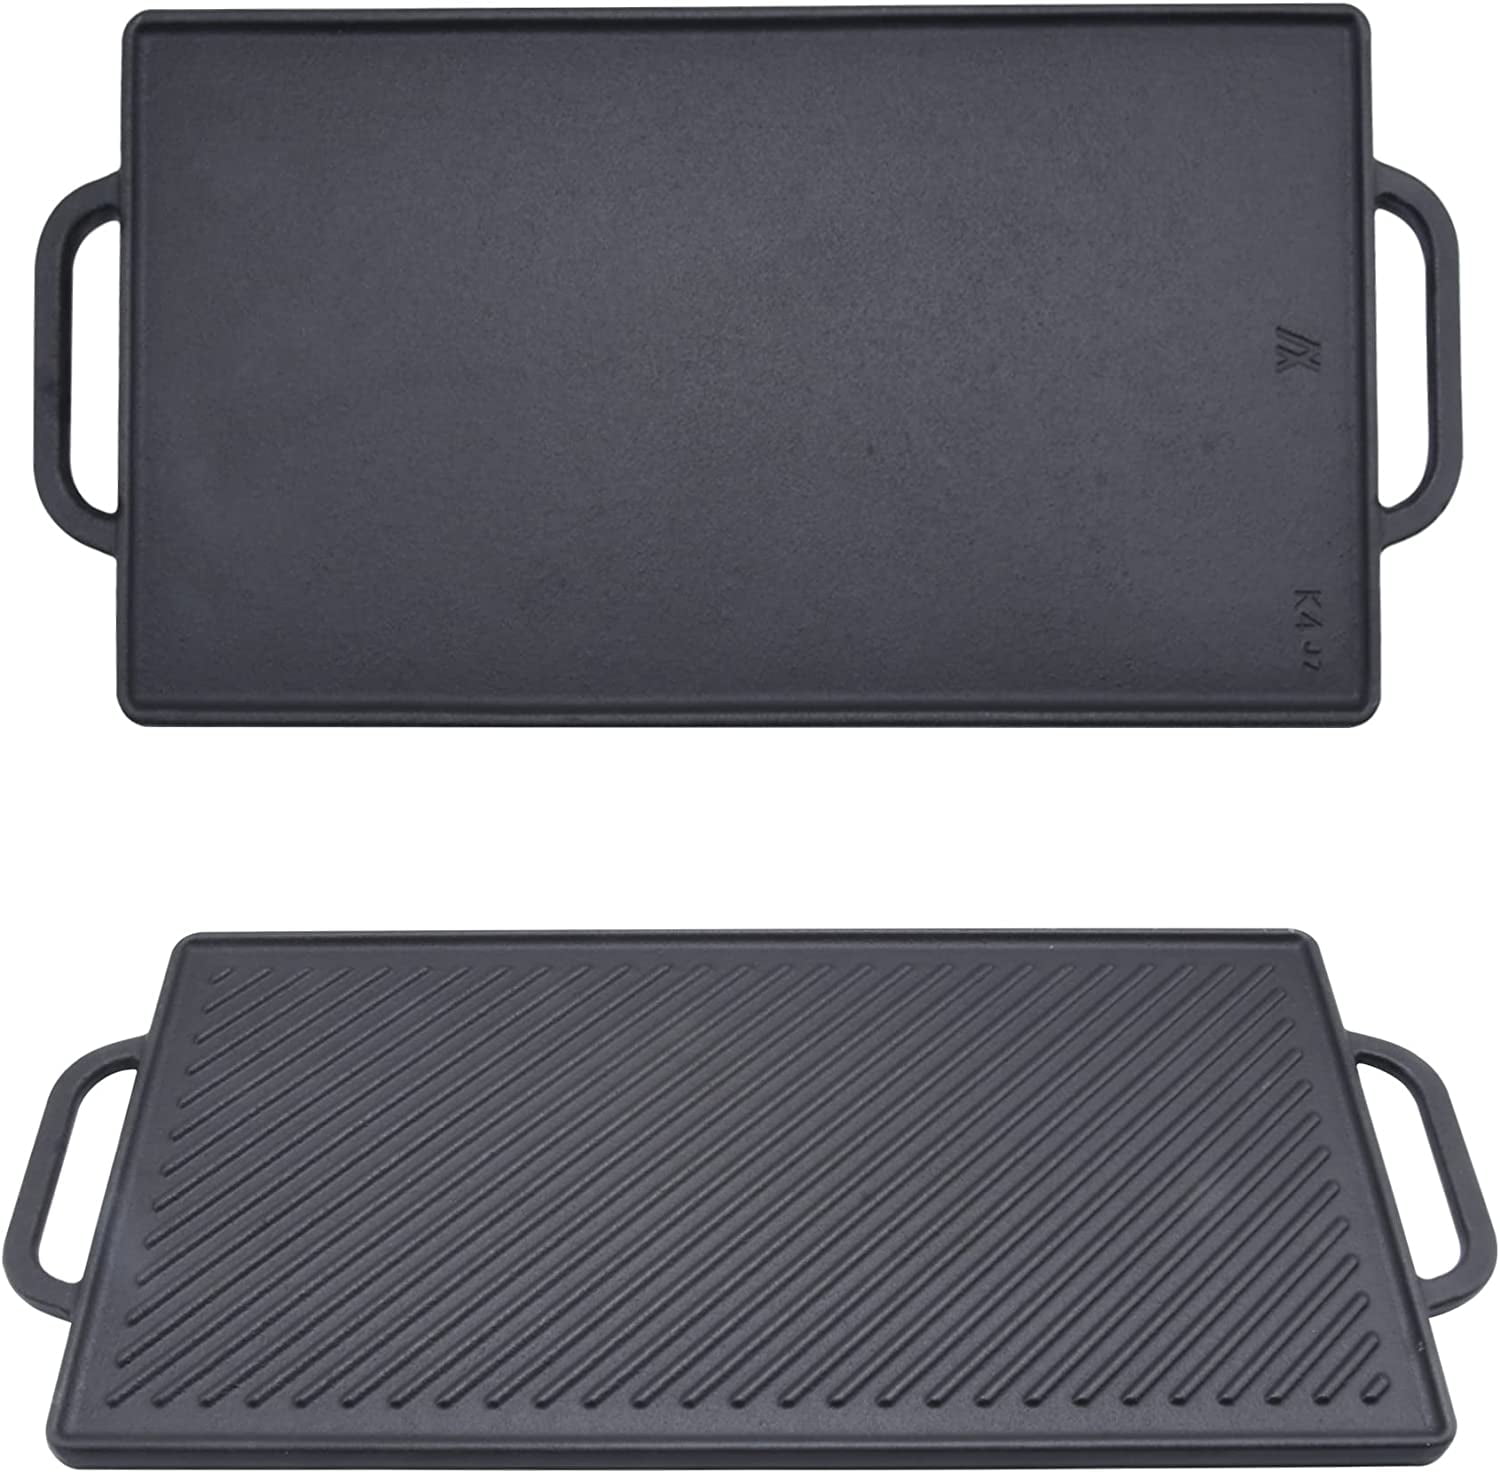 1-Piece 16.50 Inch Cast Iron Griddle Plate | Reversible Pre-Seasoned Cast  Iron Grill Pan for Gas Stovetop | Double Sided Used on Open Fire & in Oven  